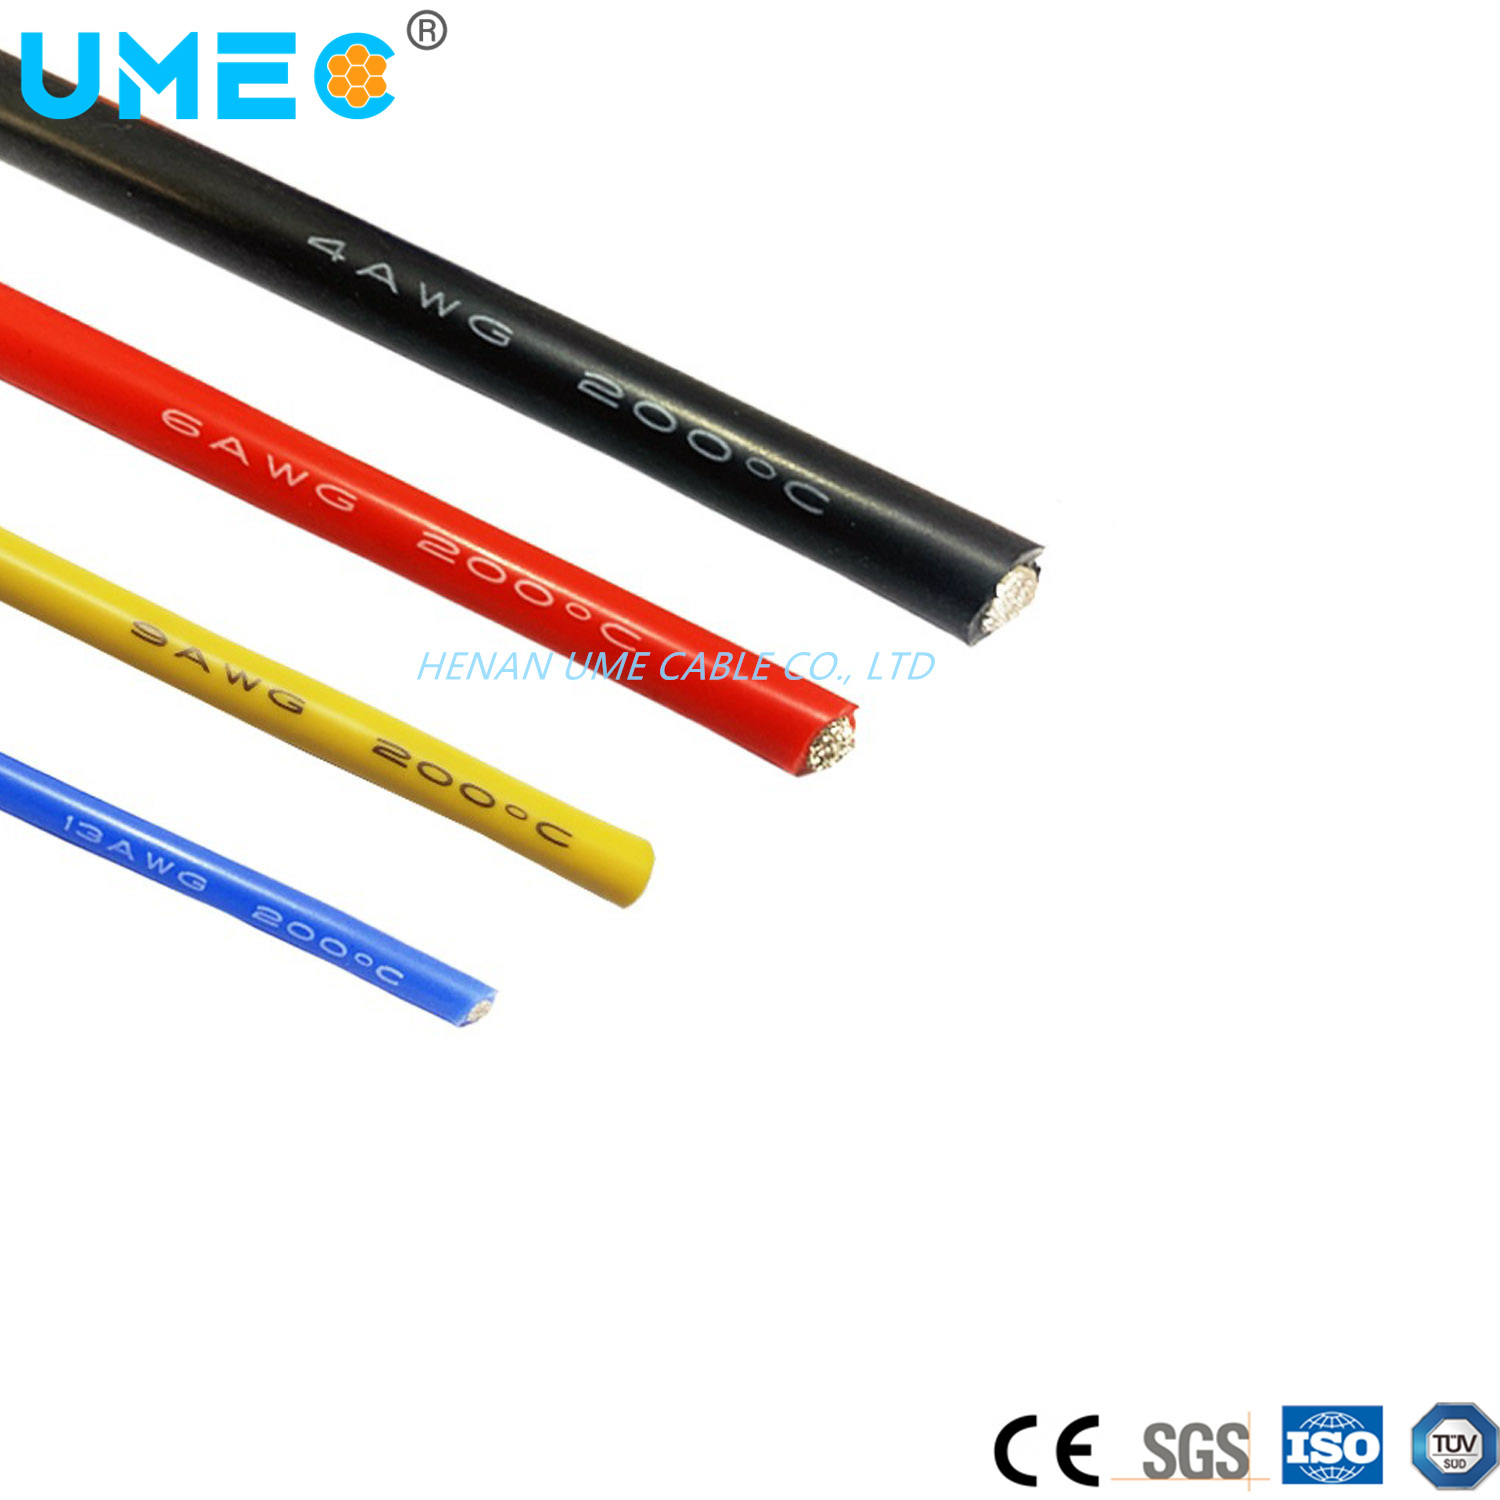 180 Degree Sif Versatile Single Core Cable with Extended Temperature Range Electric Silicone Cable Wire